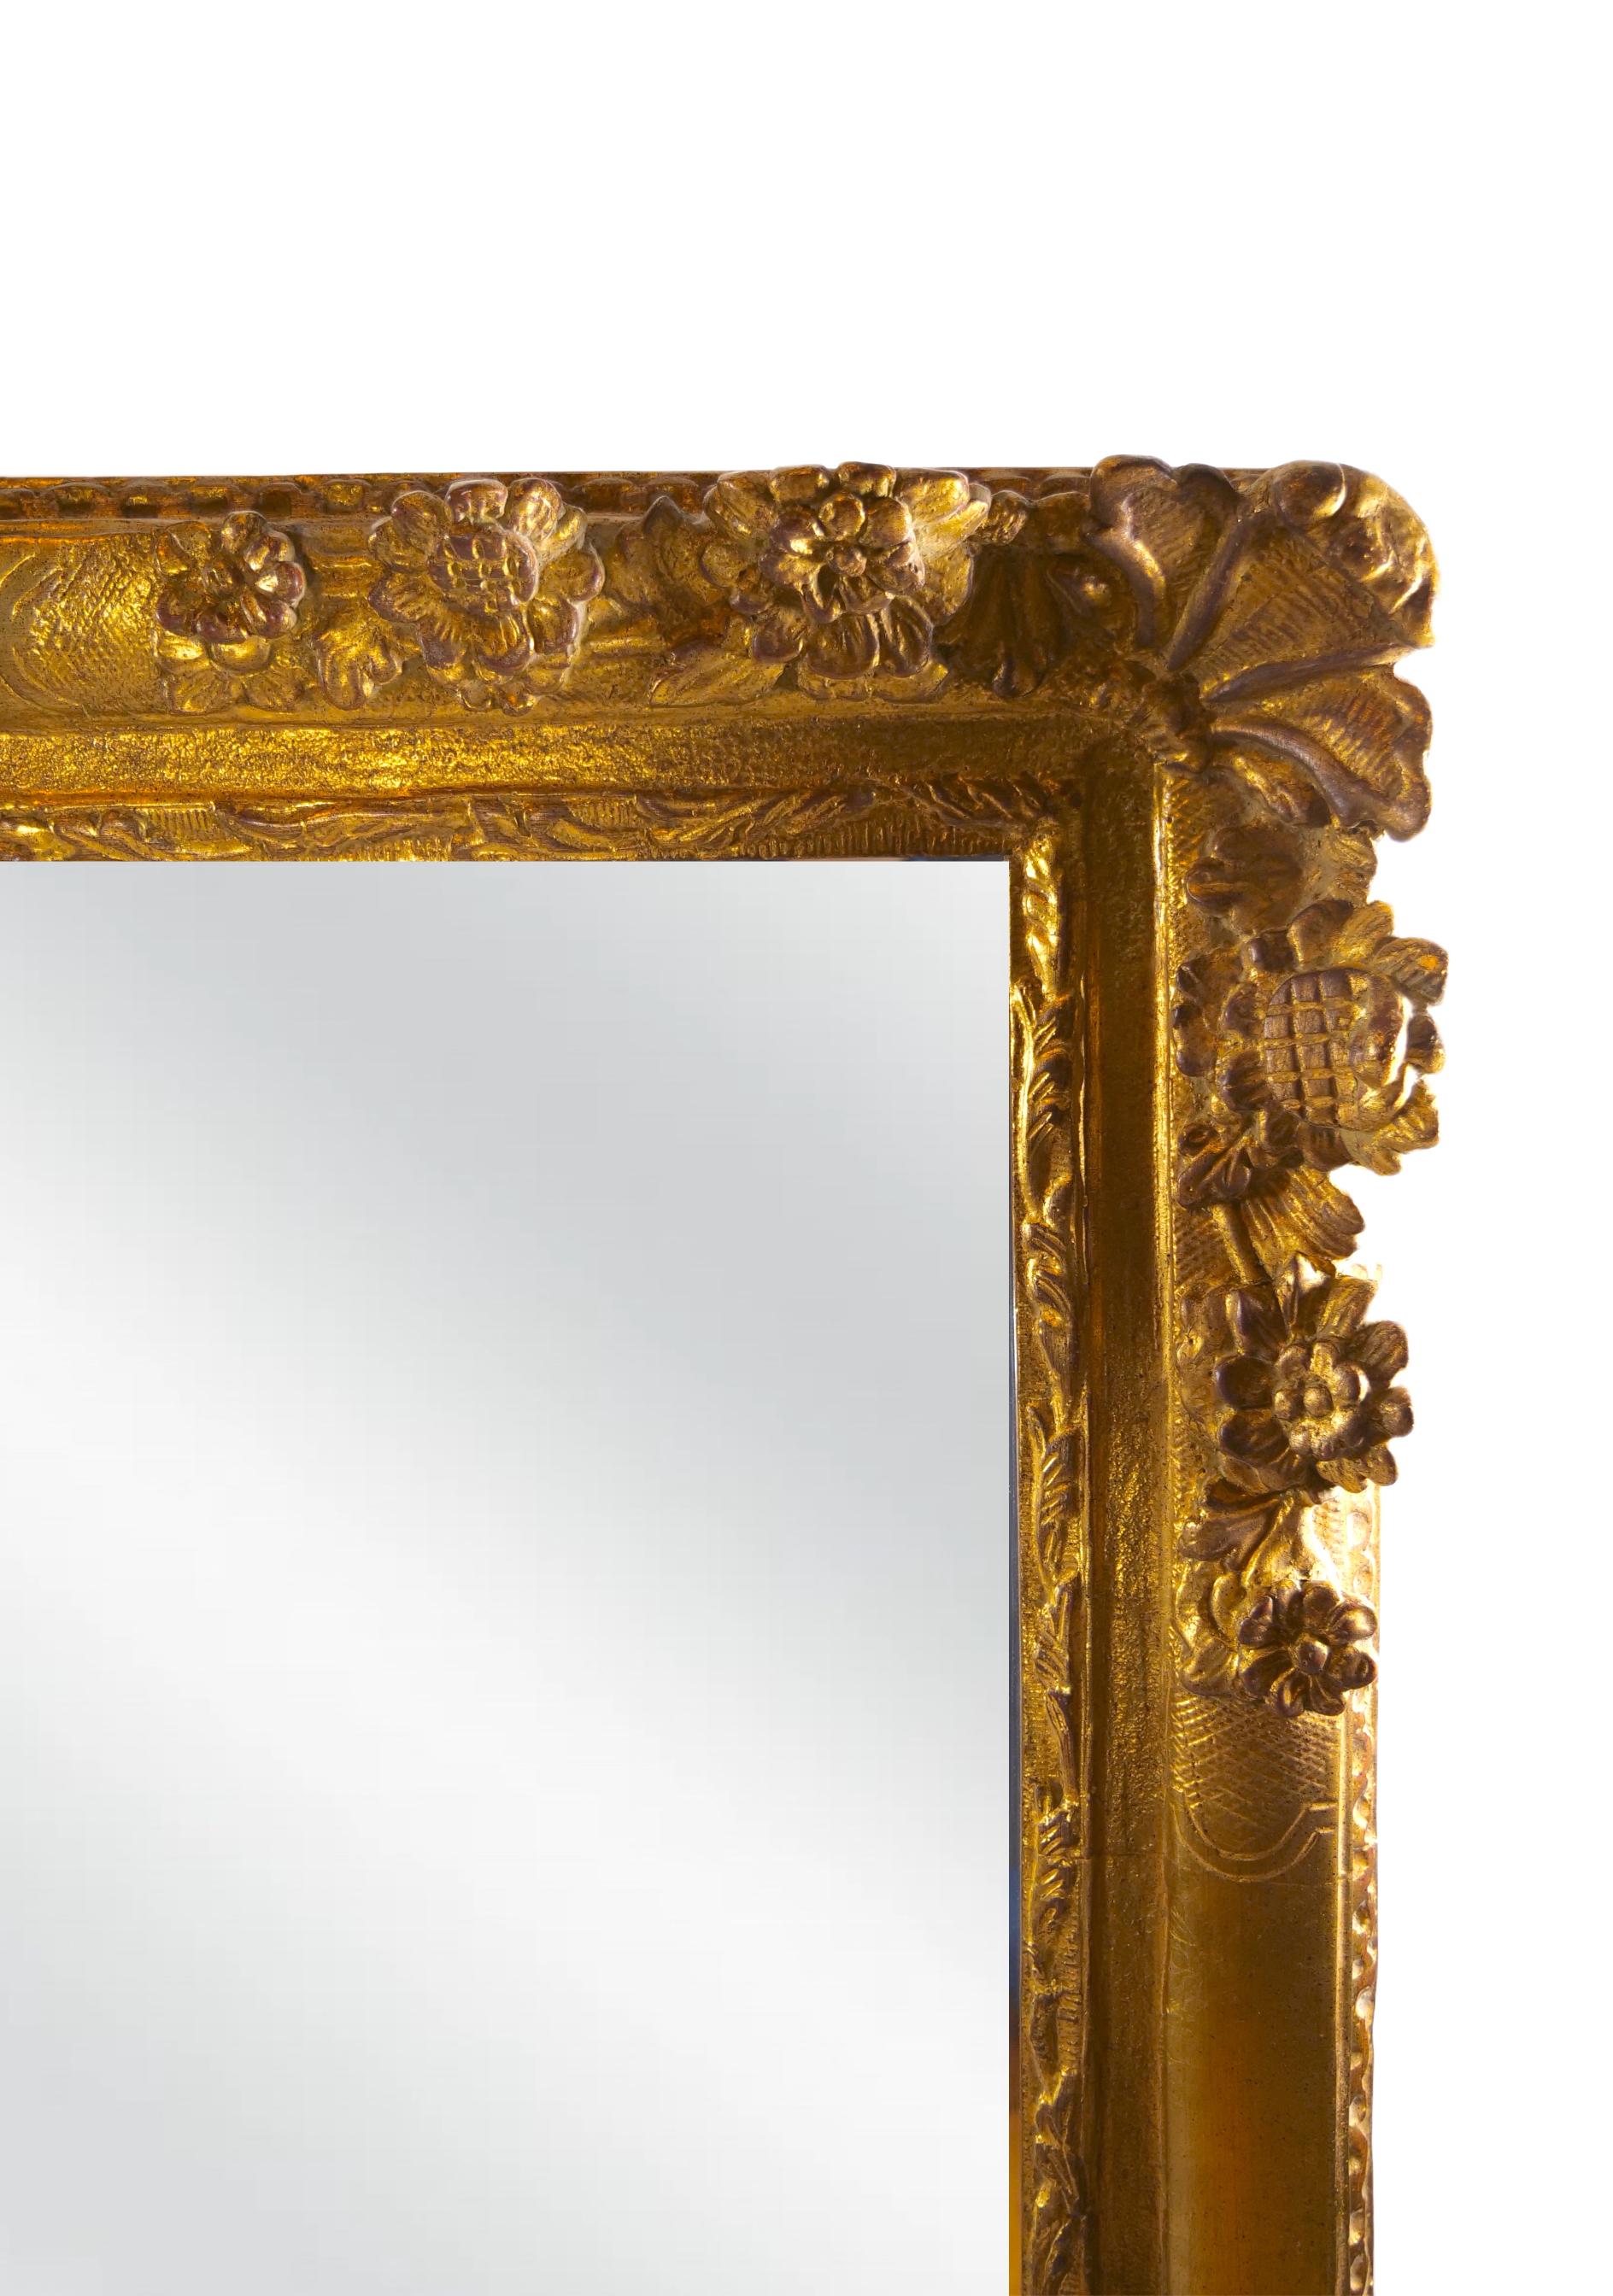 Early 20th century Louis XVI style very large gilt wood frame beveled hanging wall mirror with floral design details. The mirror is in great condition. Minor wear appropriate with age / use. It measures 60 inches high x 49 inches wide x 2